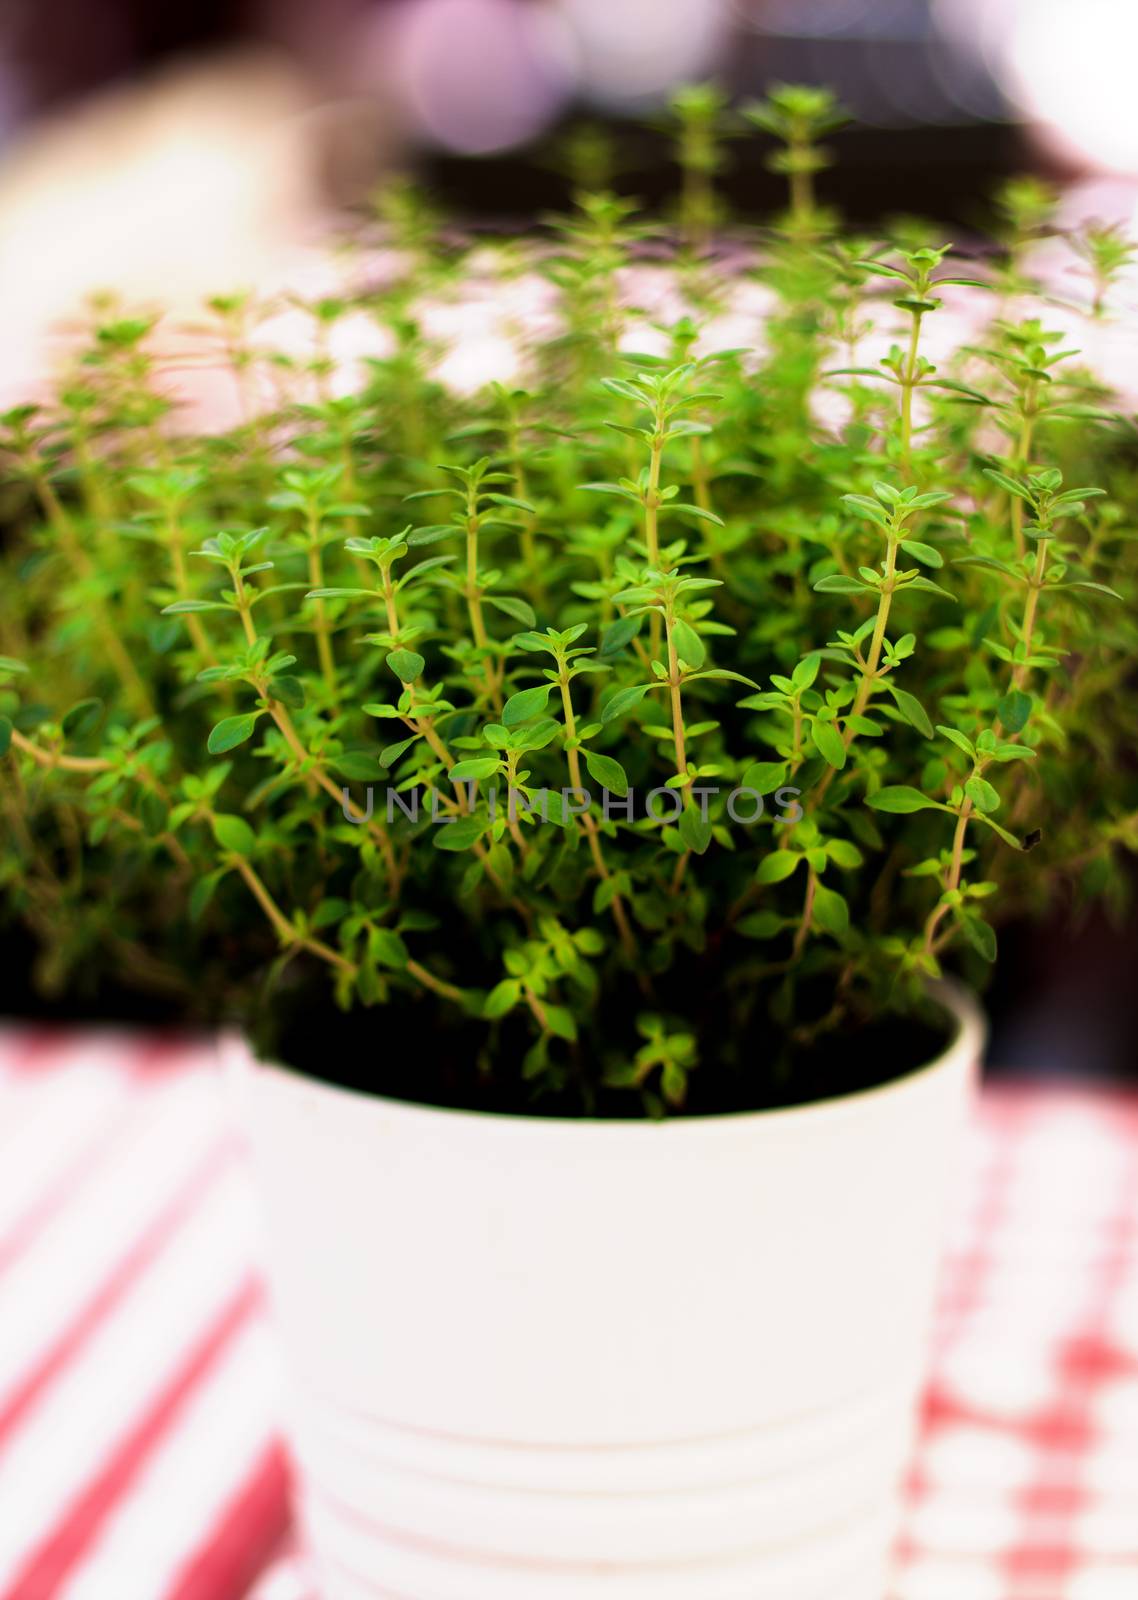 Fresh Thyme Shots in White Flower Pot closeup on Blurred background Outdoors. Focus on Foreground